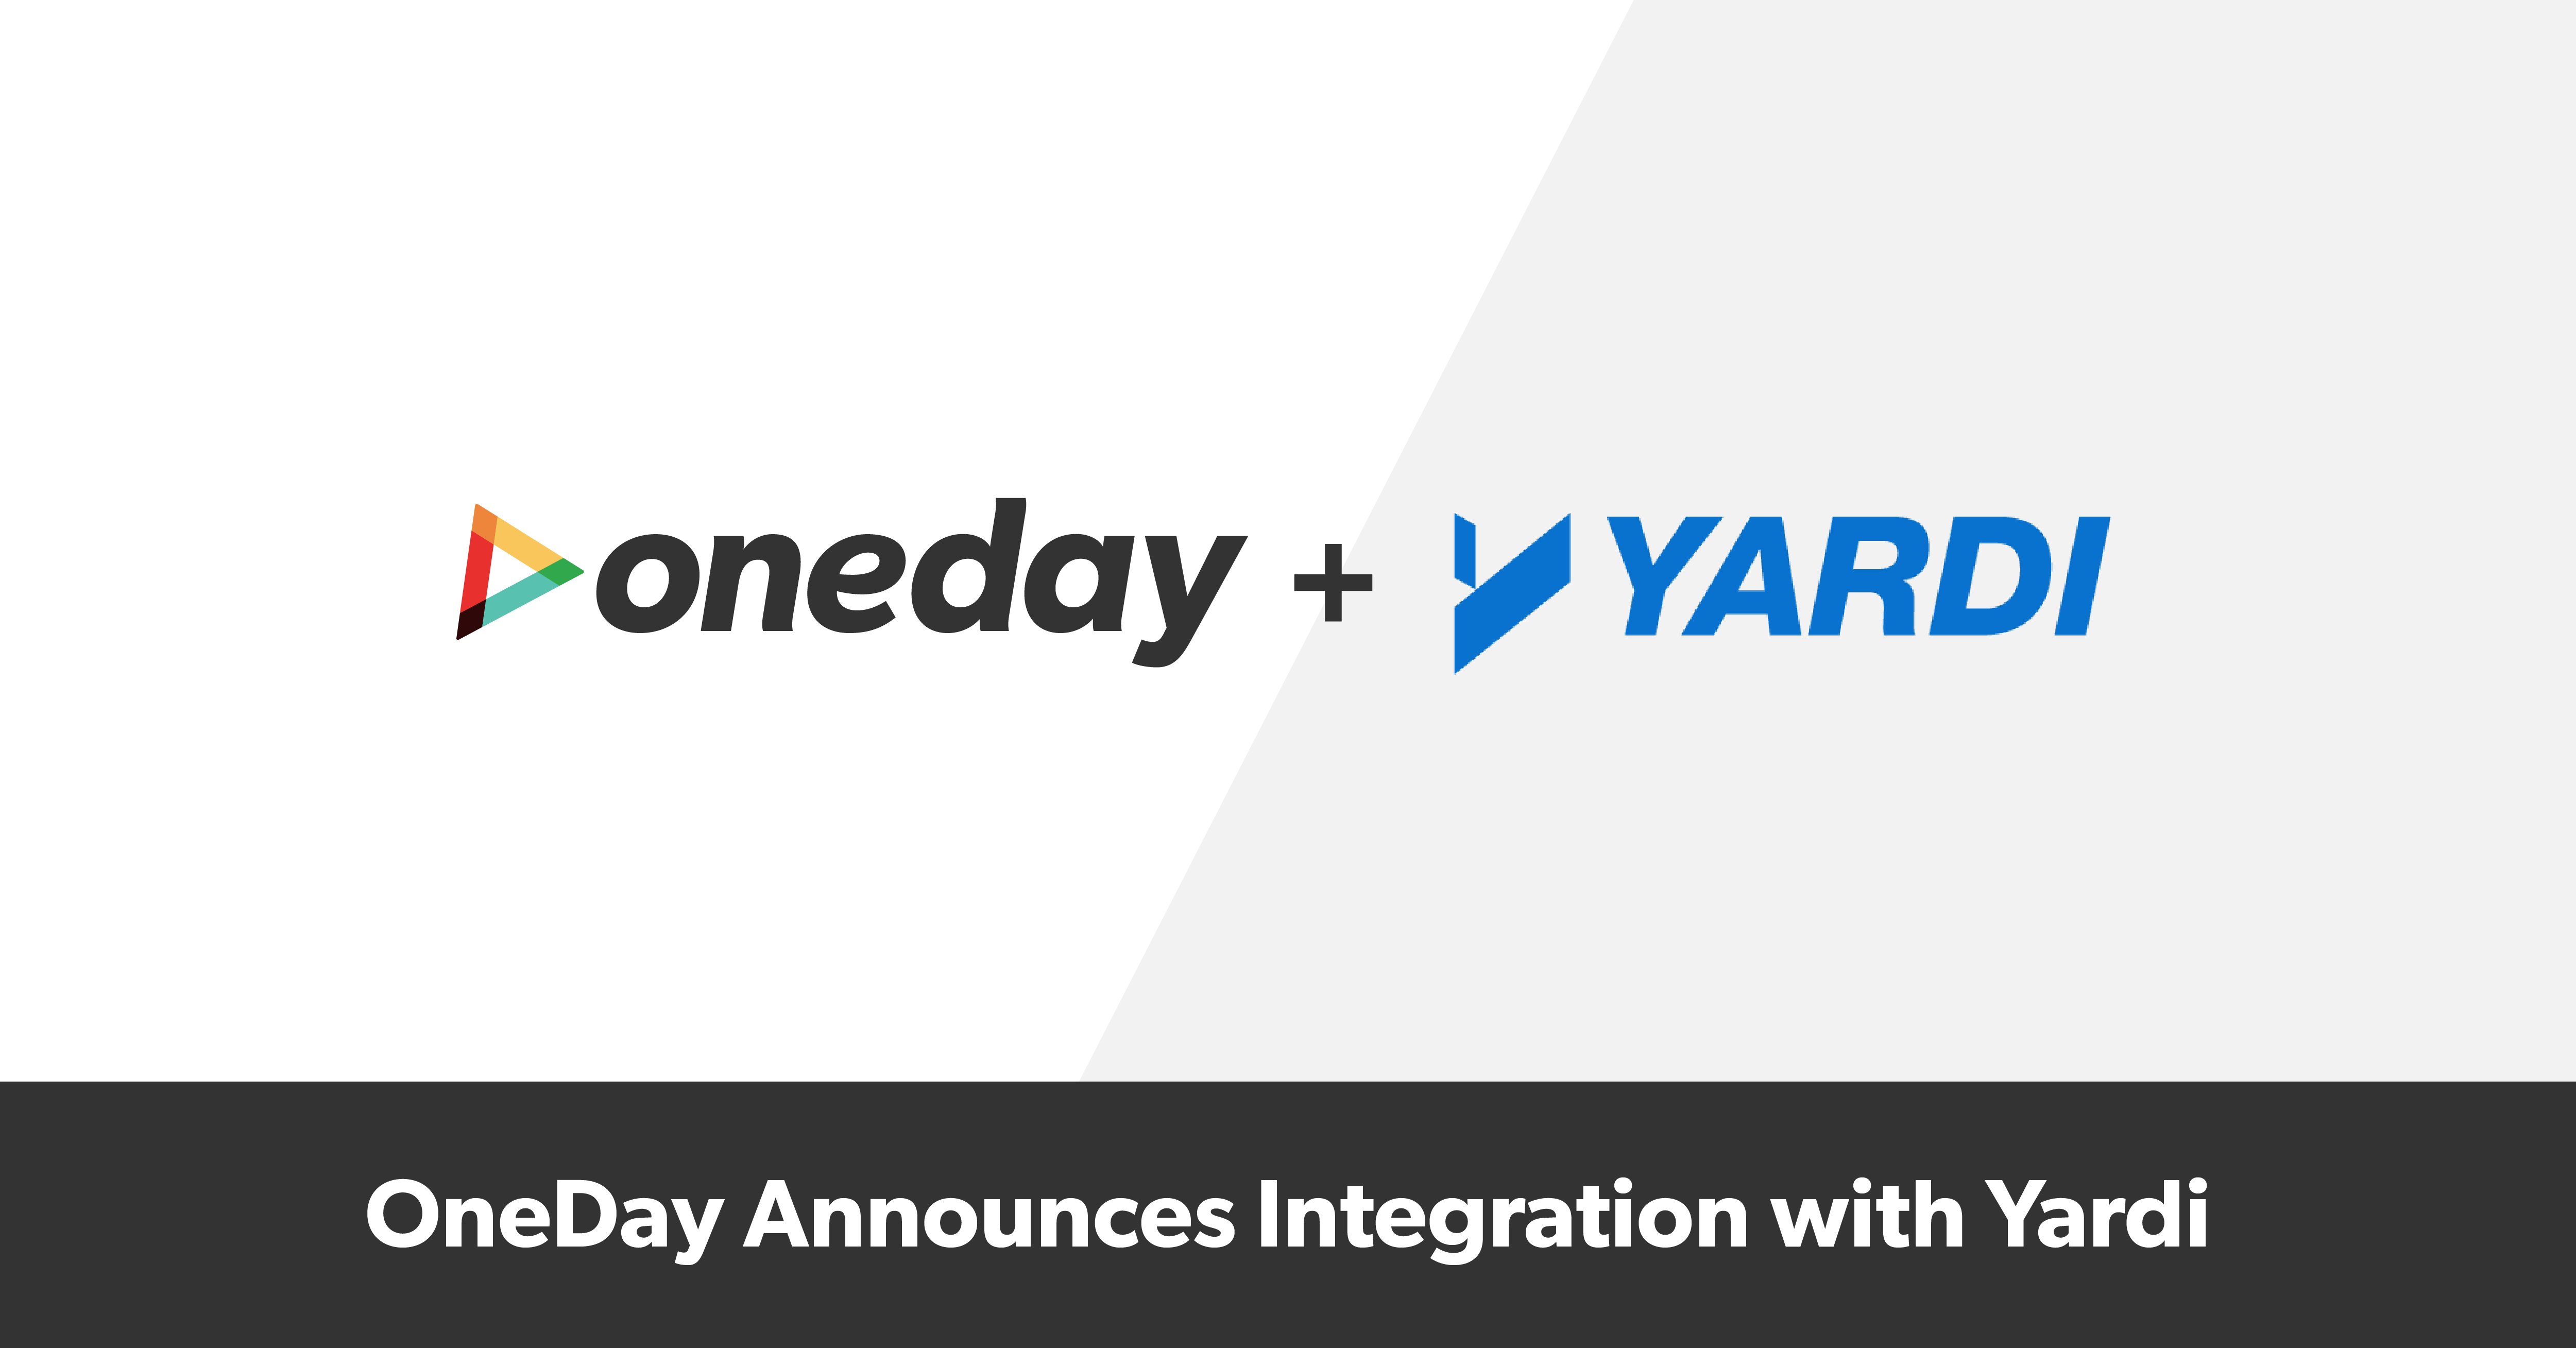 OneDay Announces Integration with Yardi. This integration seamlessly brings together video creation, sharing, and tracking together in one place.